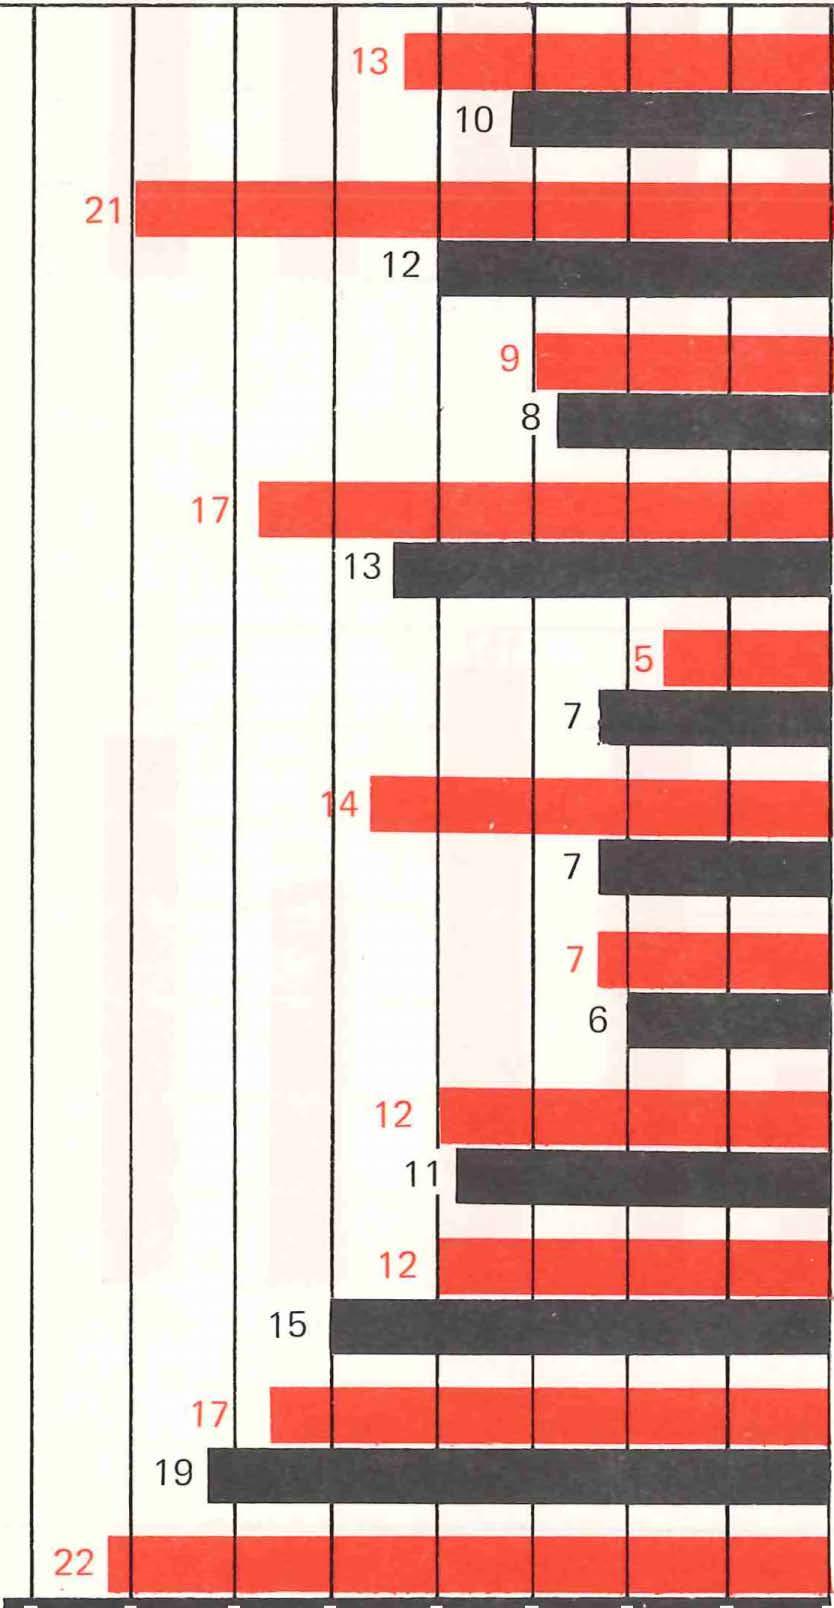 AGES OF PEDESTRANS KLLED AND NJURED N 1973 COMPARED WTH THE